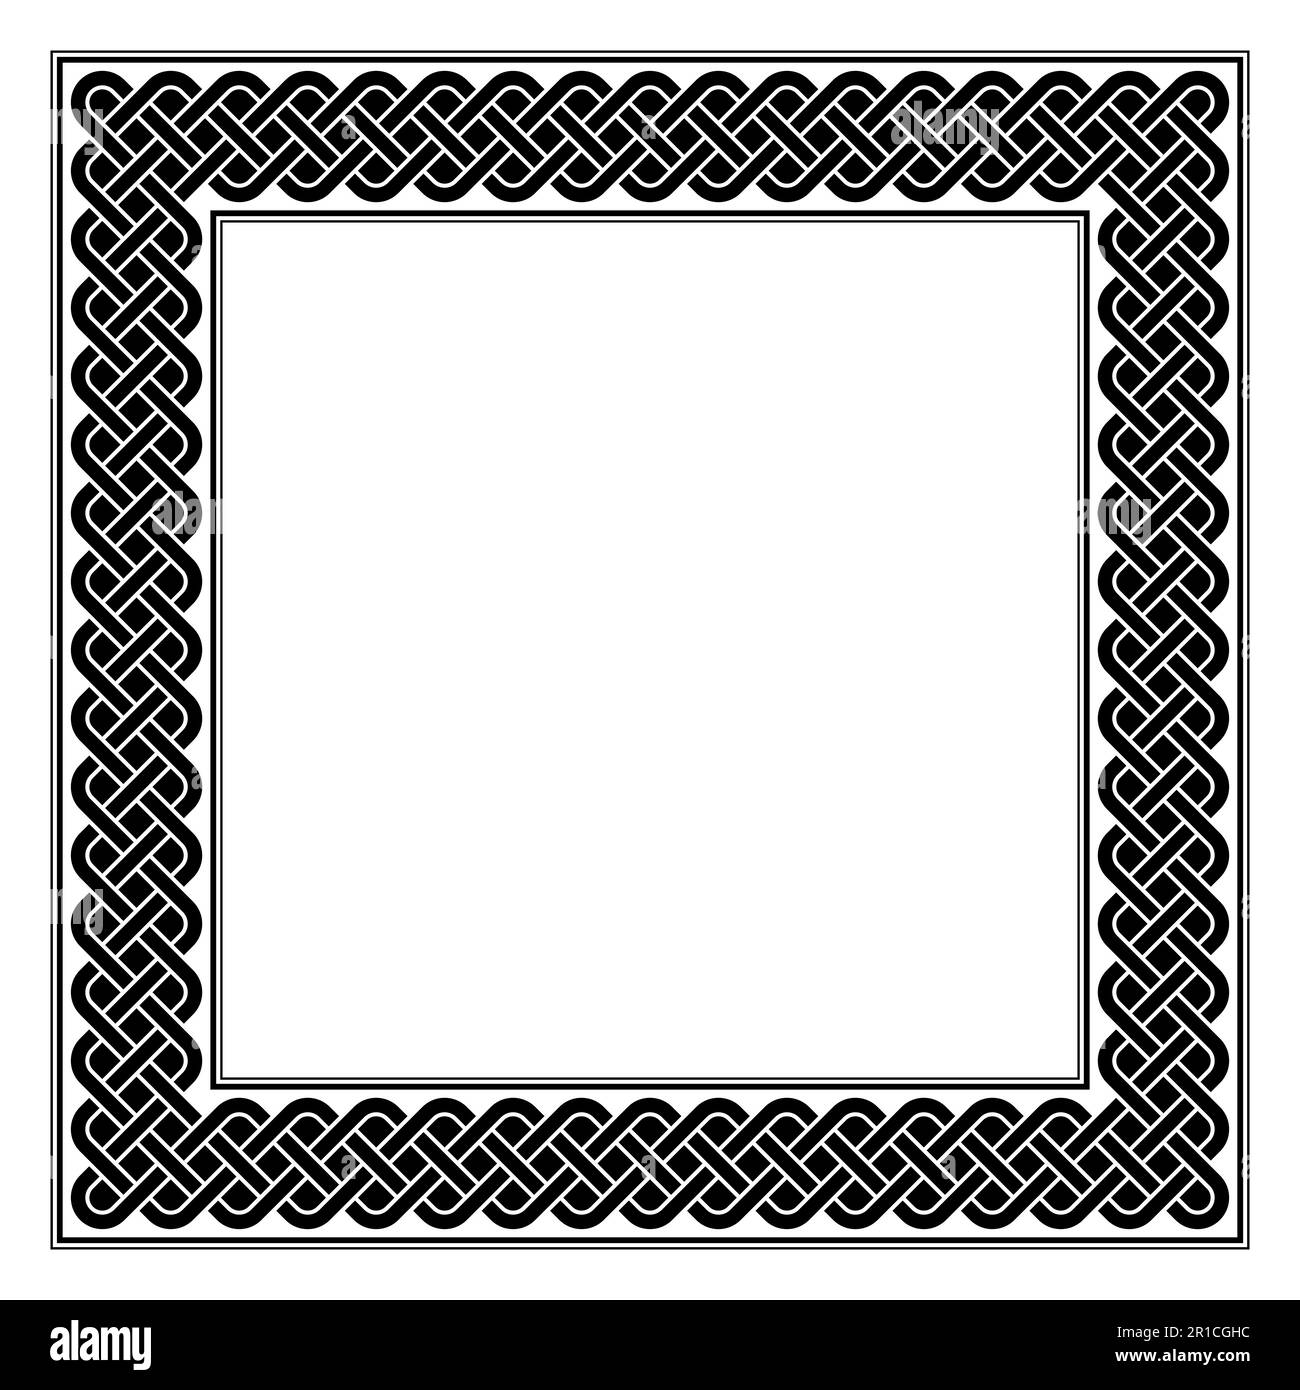 Square frame with guilloche knot pattern. Border made of endless repeated motifs of the Solomons knot, consisting of three interlaced lines. Stock Photo